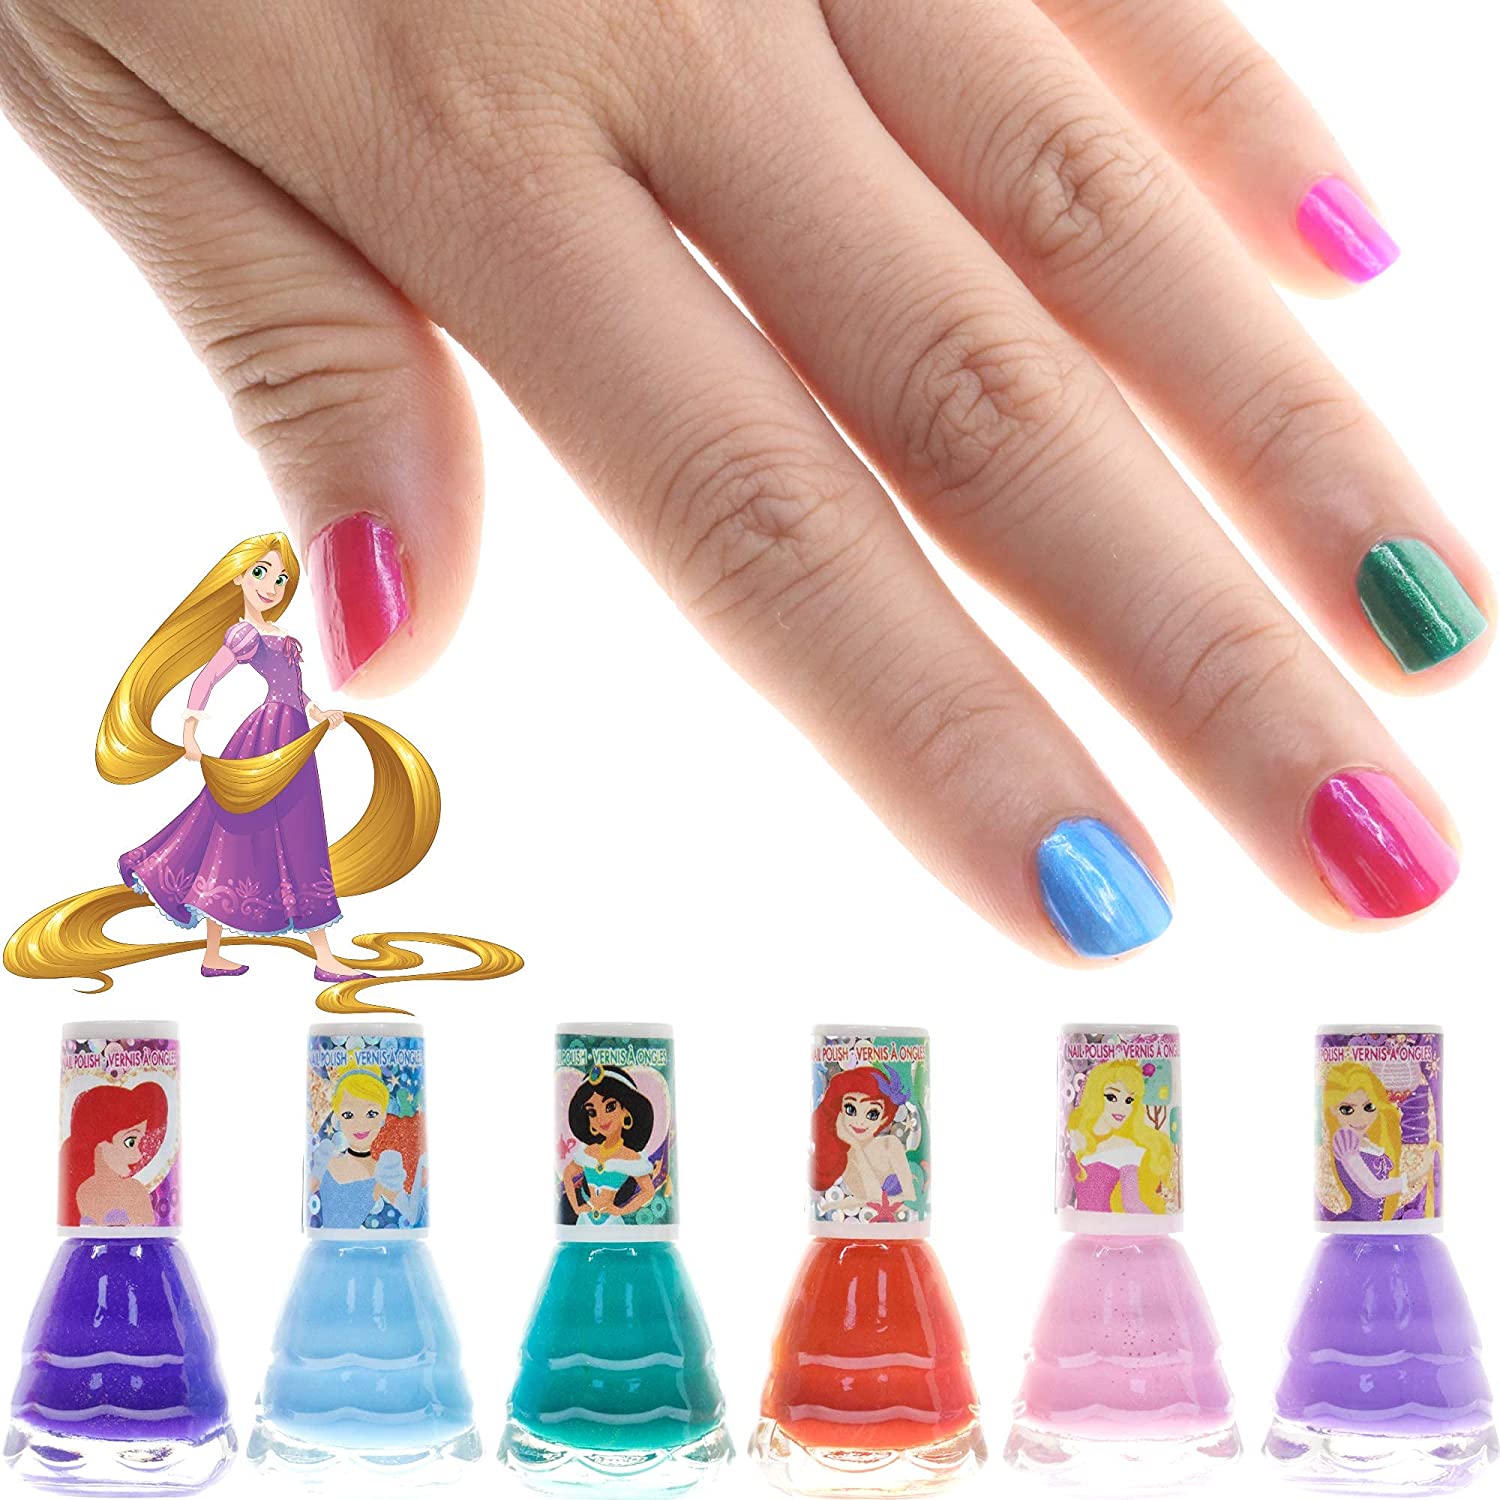 Disney Princess - Townley Girl Castlebox Non-Toxic Peel-Off Nail Polish Set for Girls, Opaque Colors, Ages 3+ - 18 CT - image 5 of 10